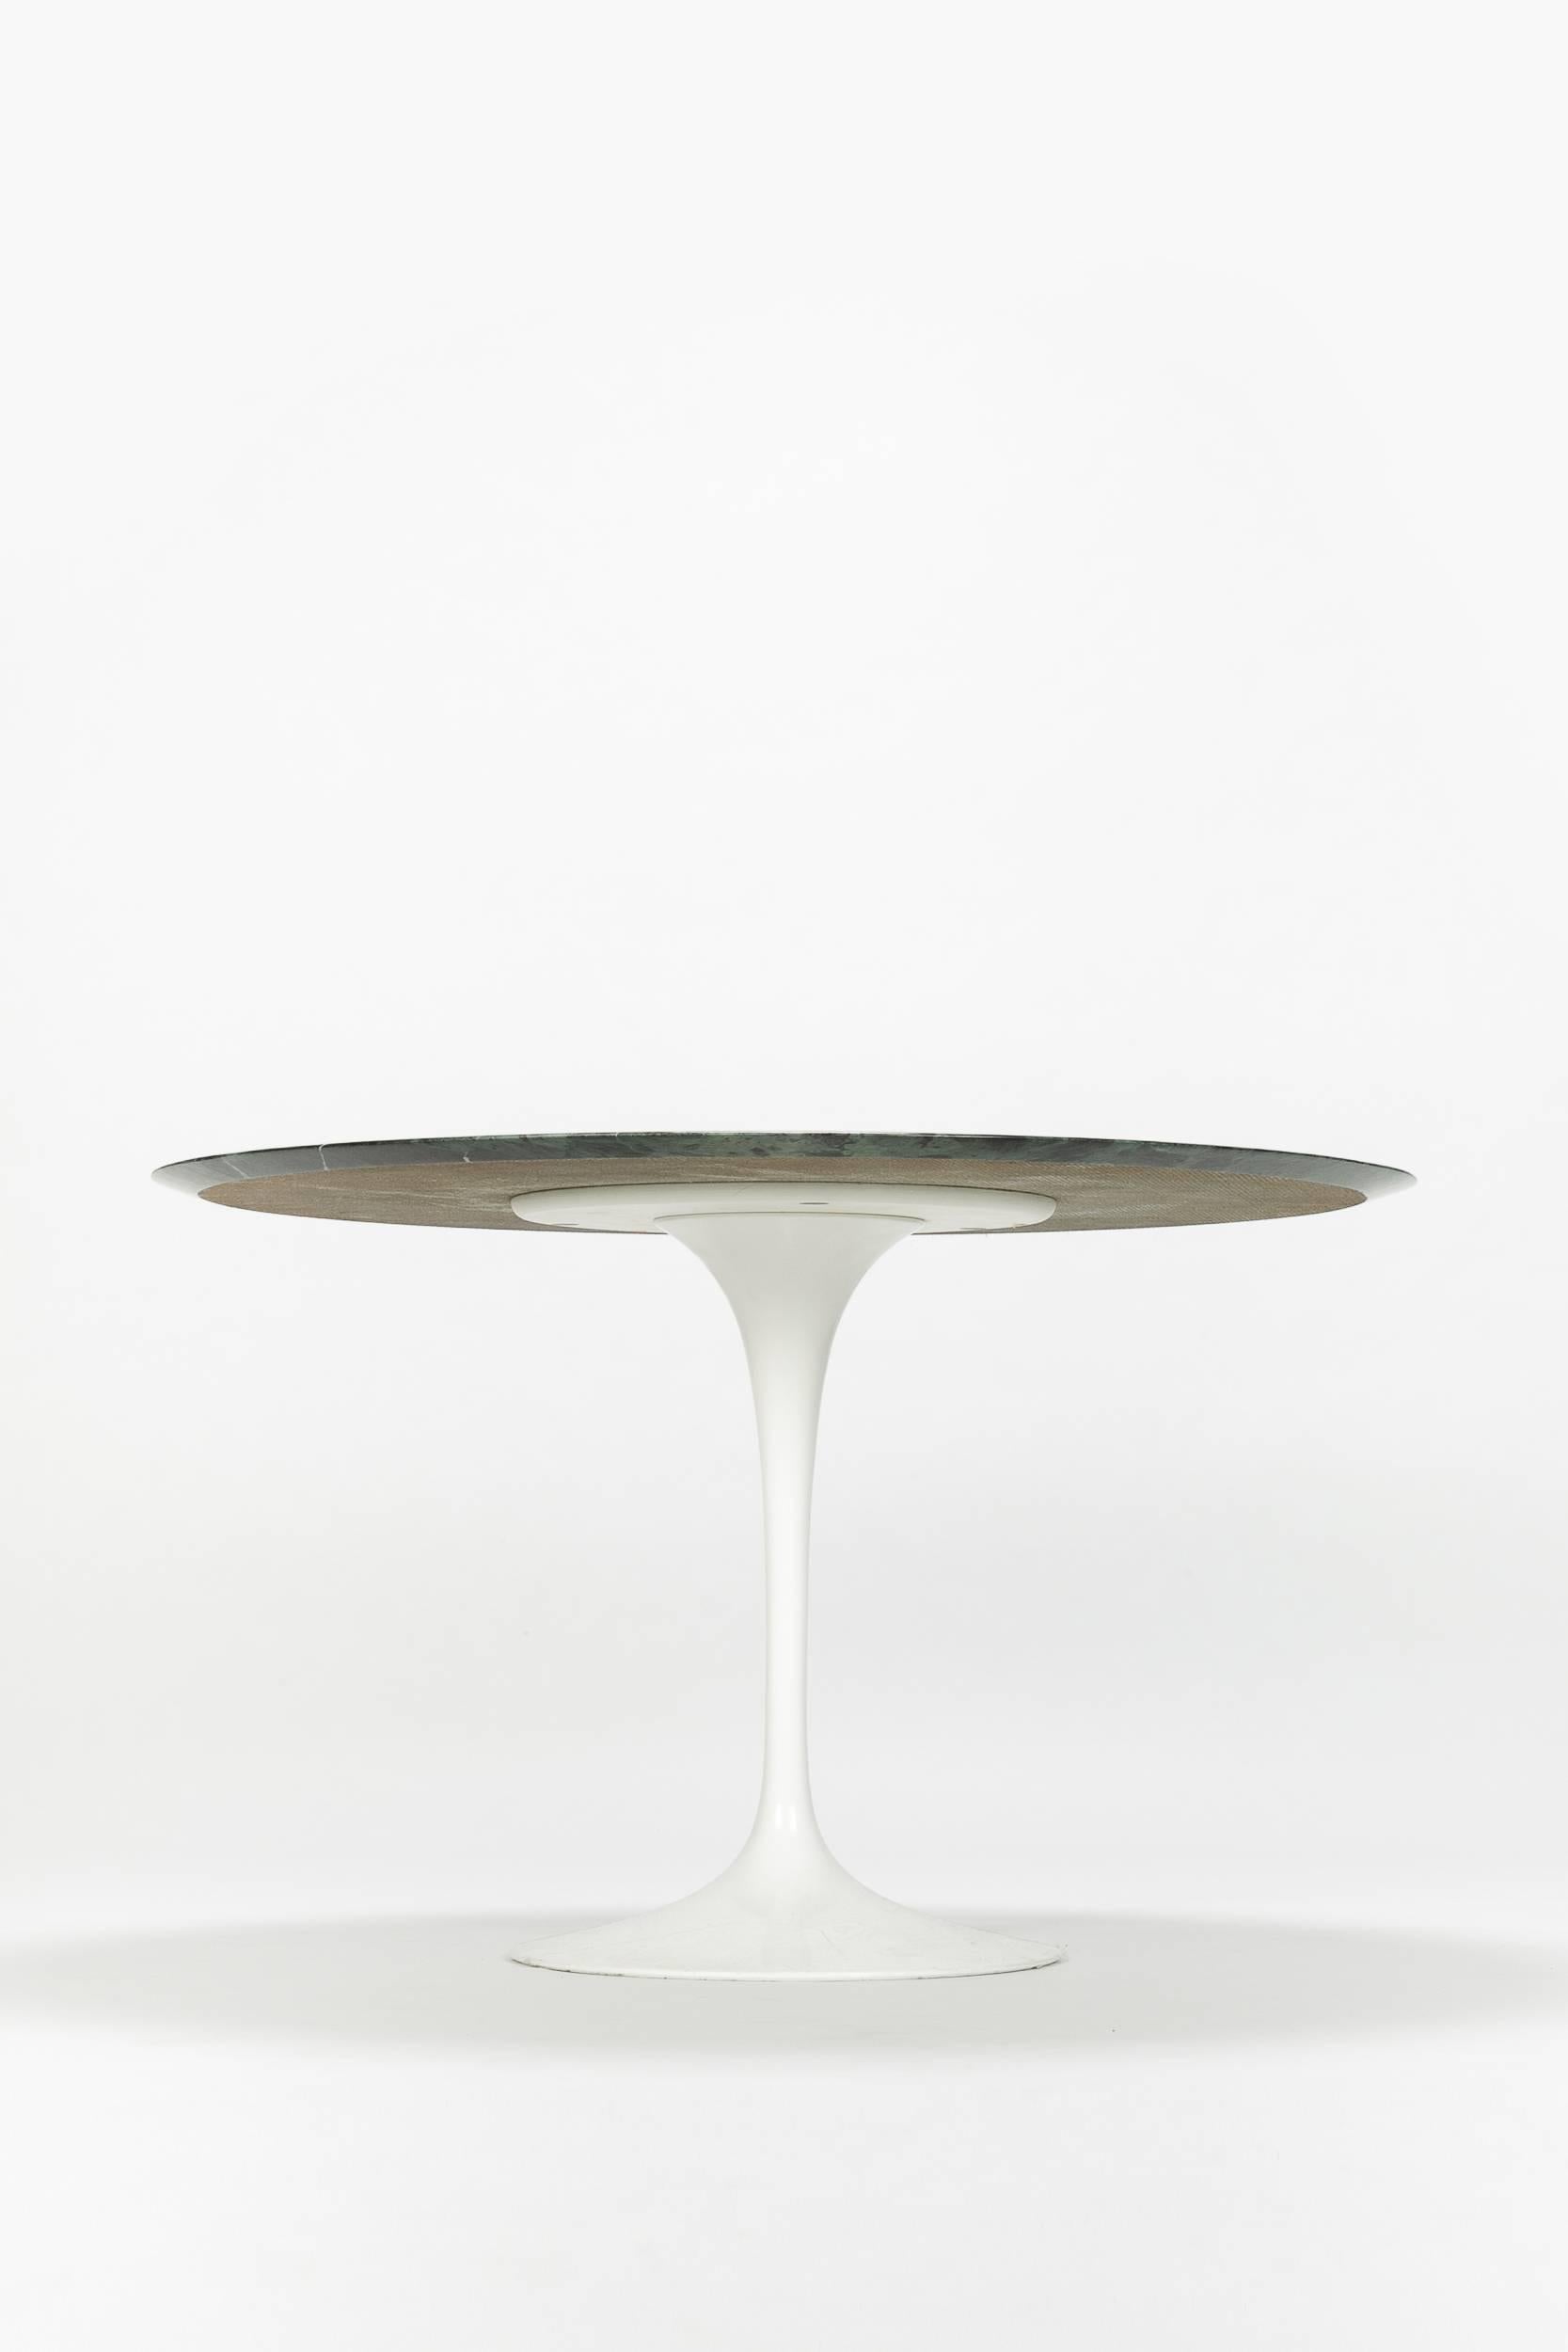 Saarinen table with a beautiful green marble “Verdi Alpi” tabletop. Base made of white powder coated metal. This model has been specially manufactured in the 1970s for a company in Paris.